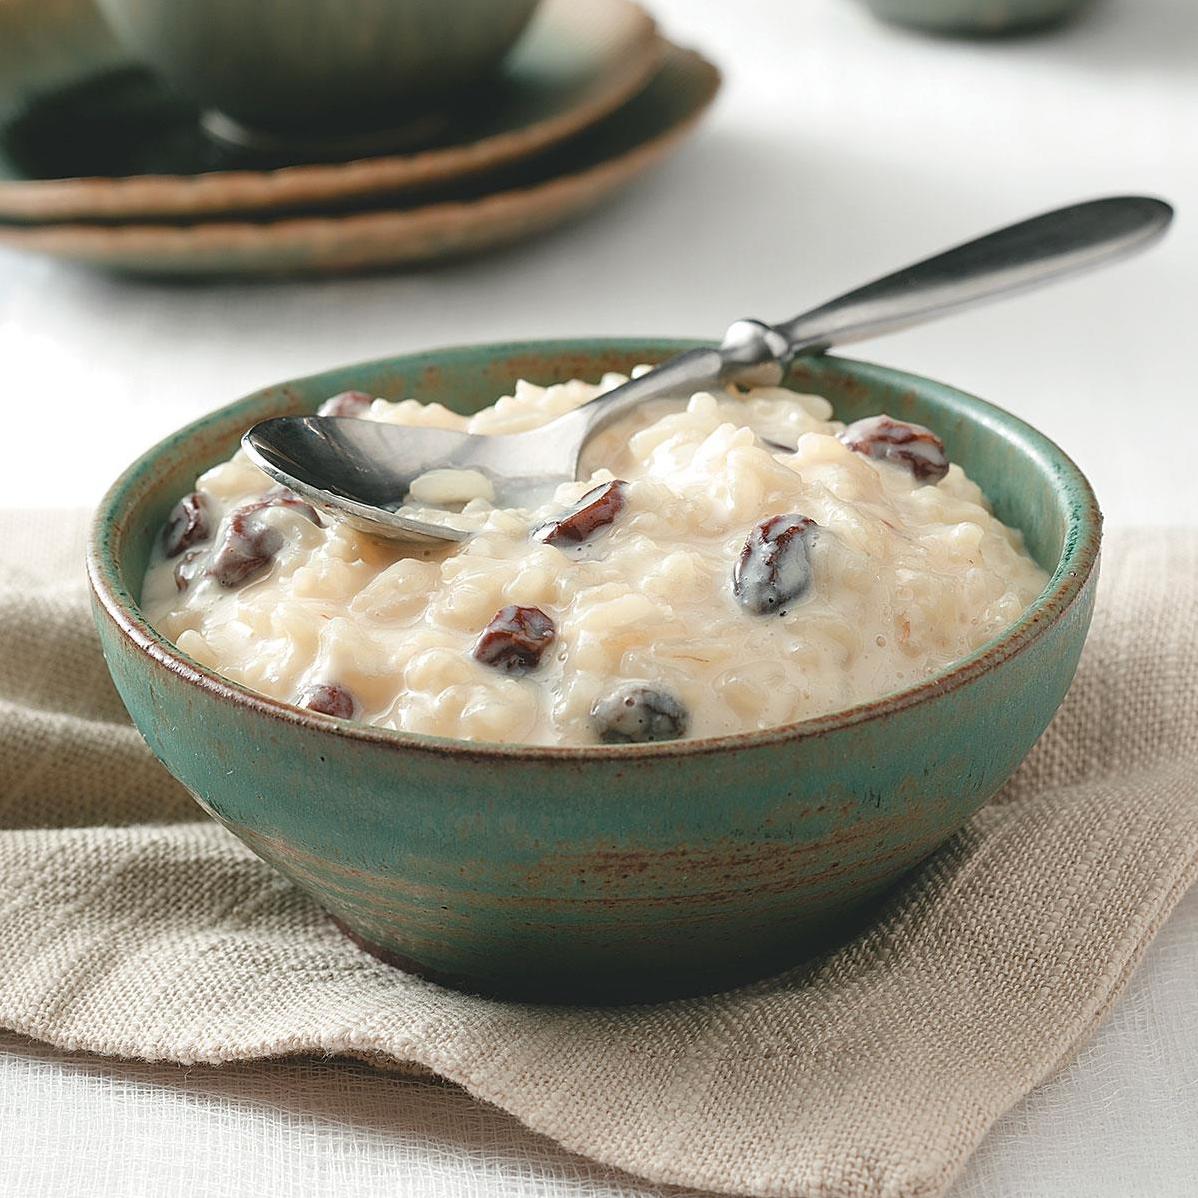  Velvety and creamy rice pudding infused with cinnamon and vanilla flavors.